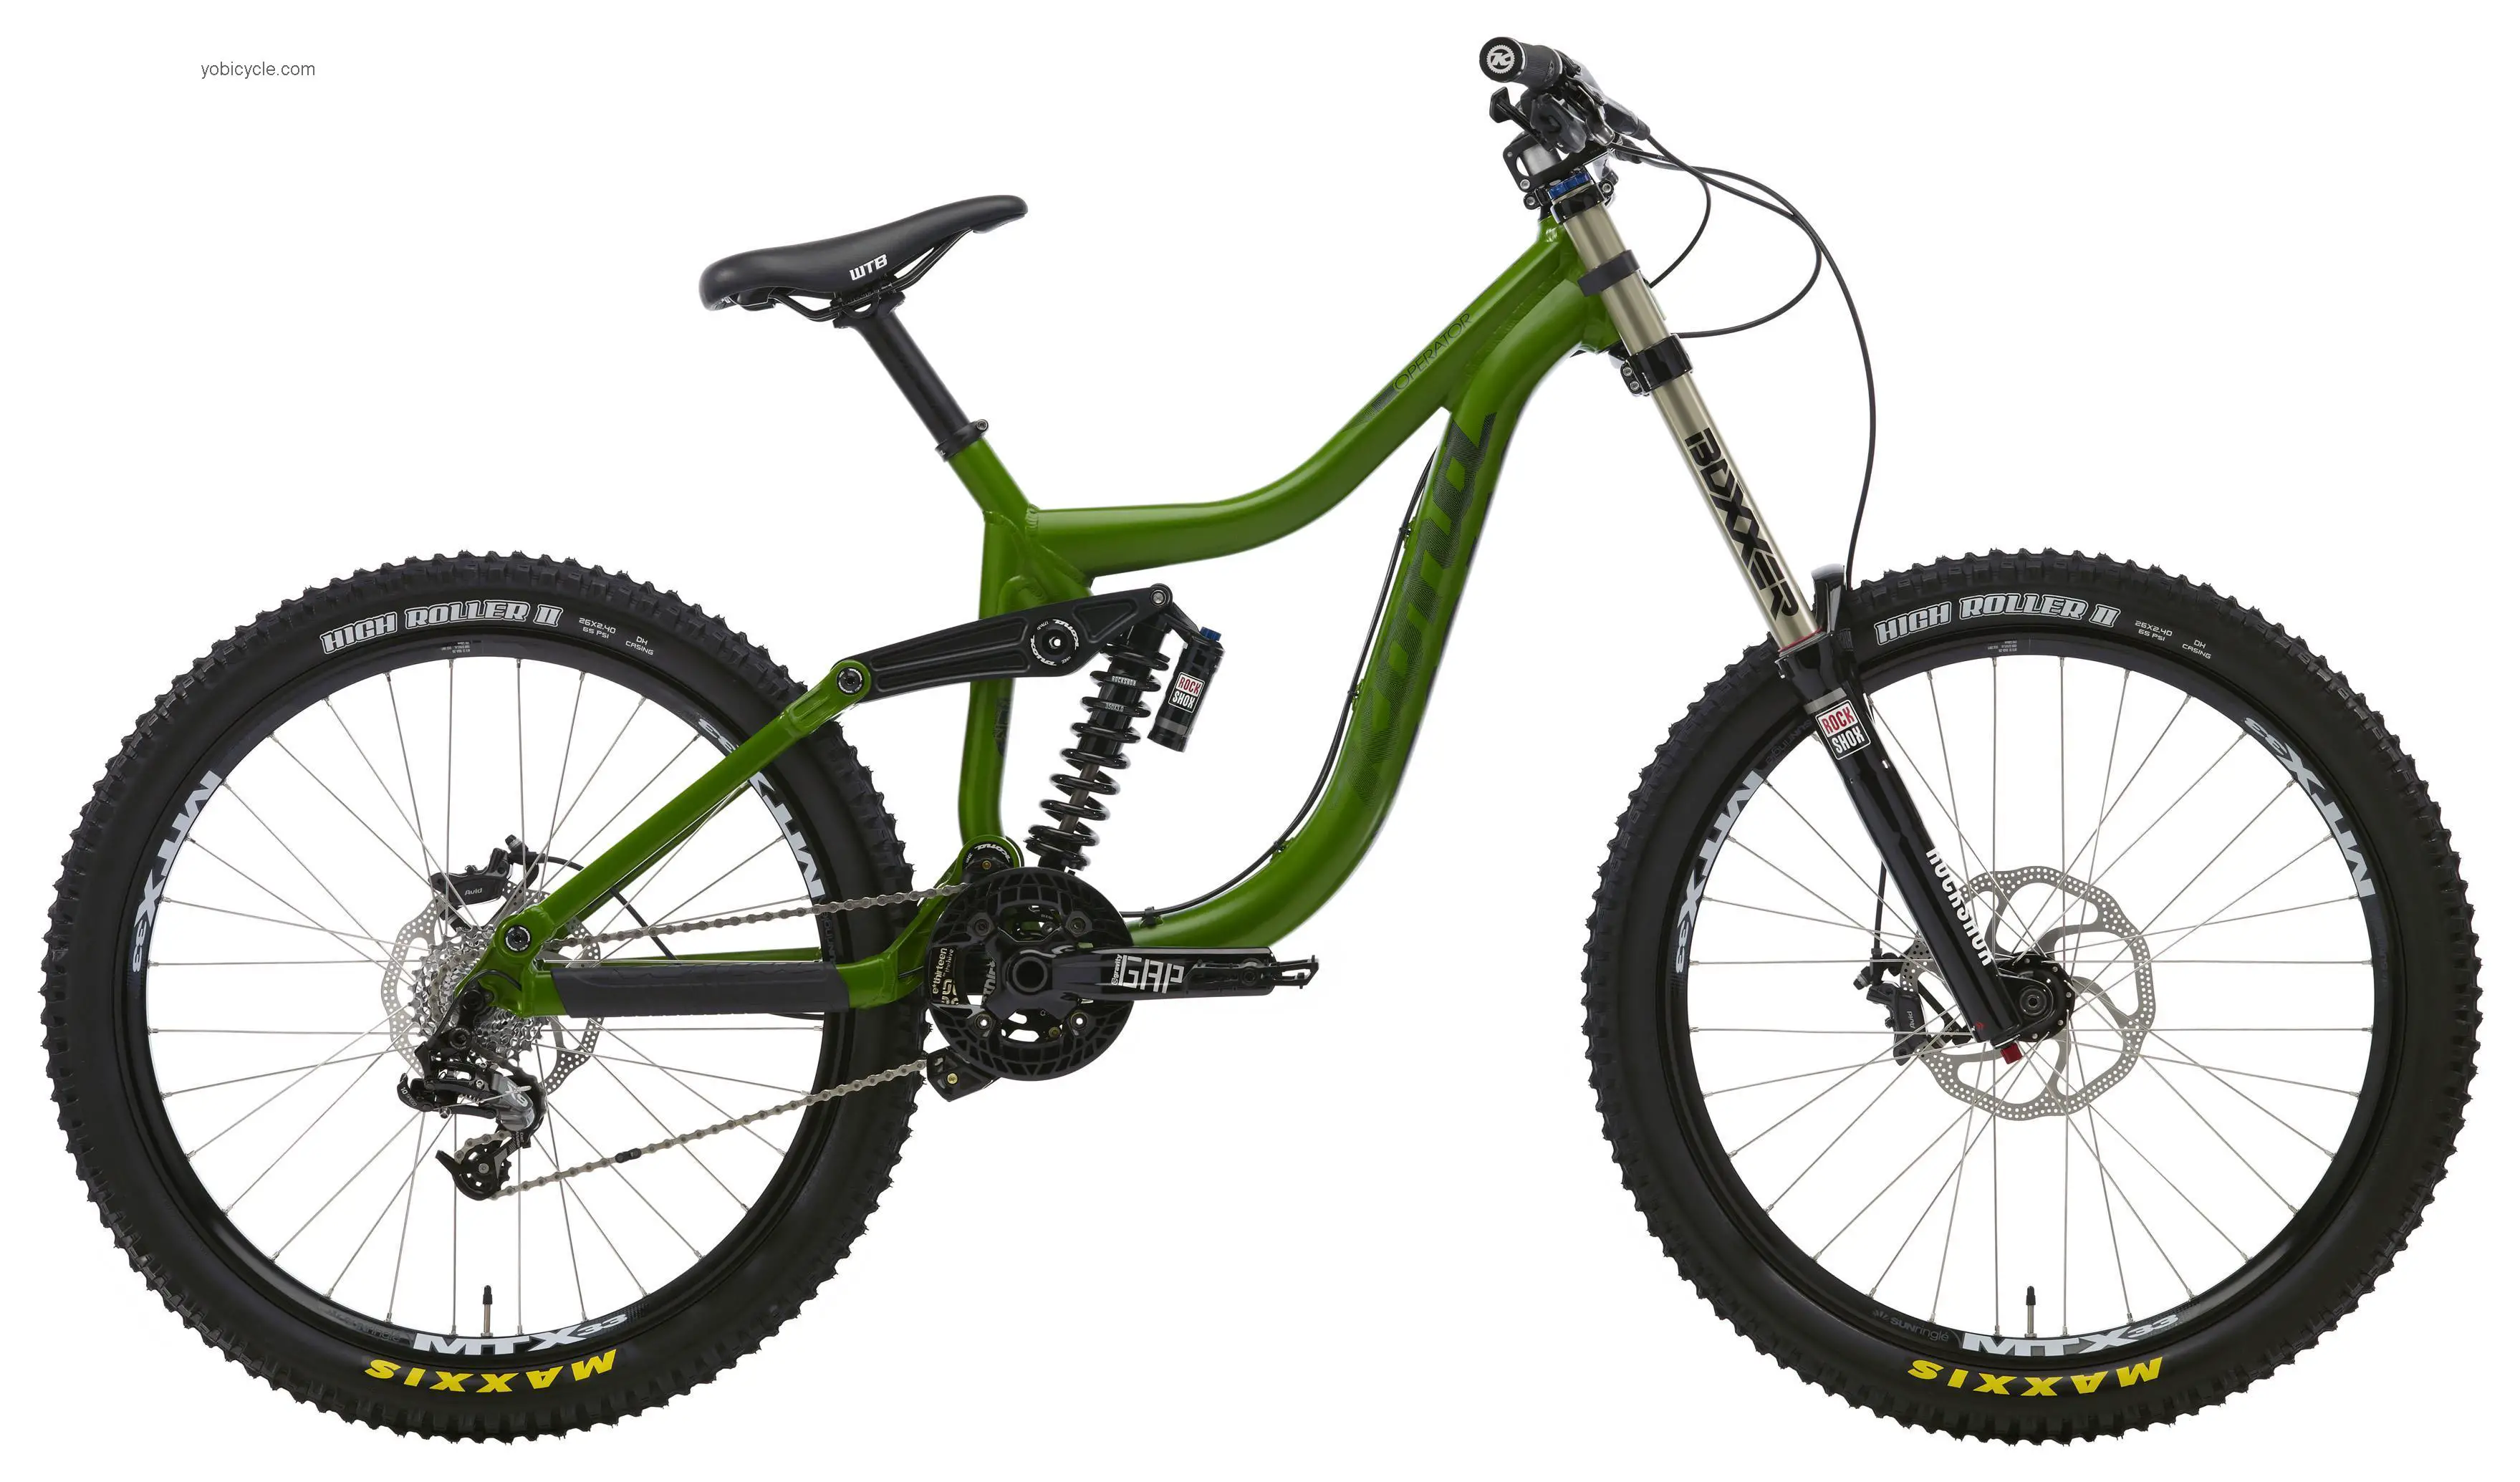 Kona Operator competitors and comparison tool online specs and performance